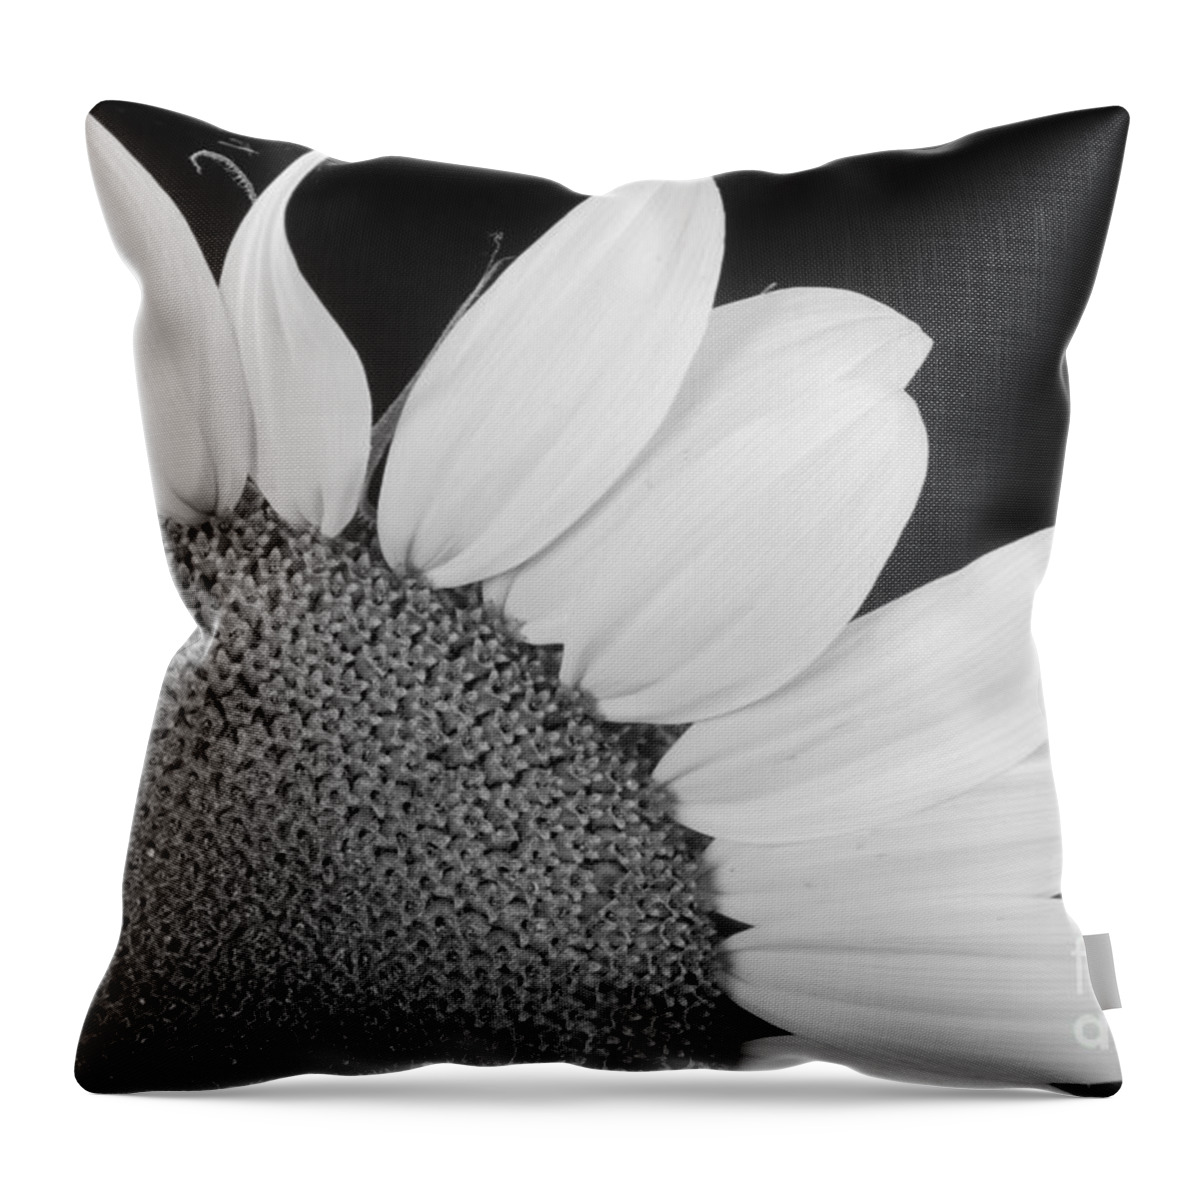 Sunflowers Throw Pillow featuring the photograph Sunflower Three Quarter by James BO Insogna